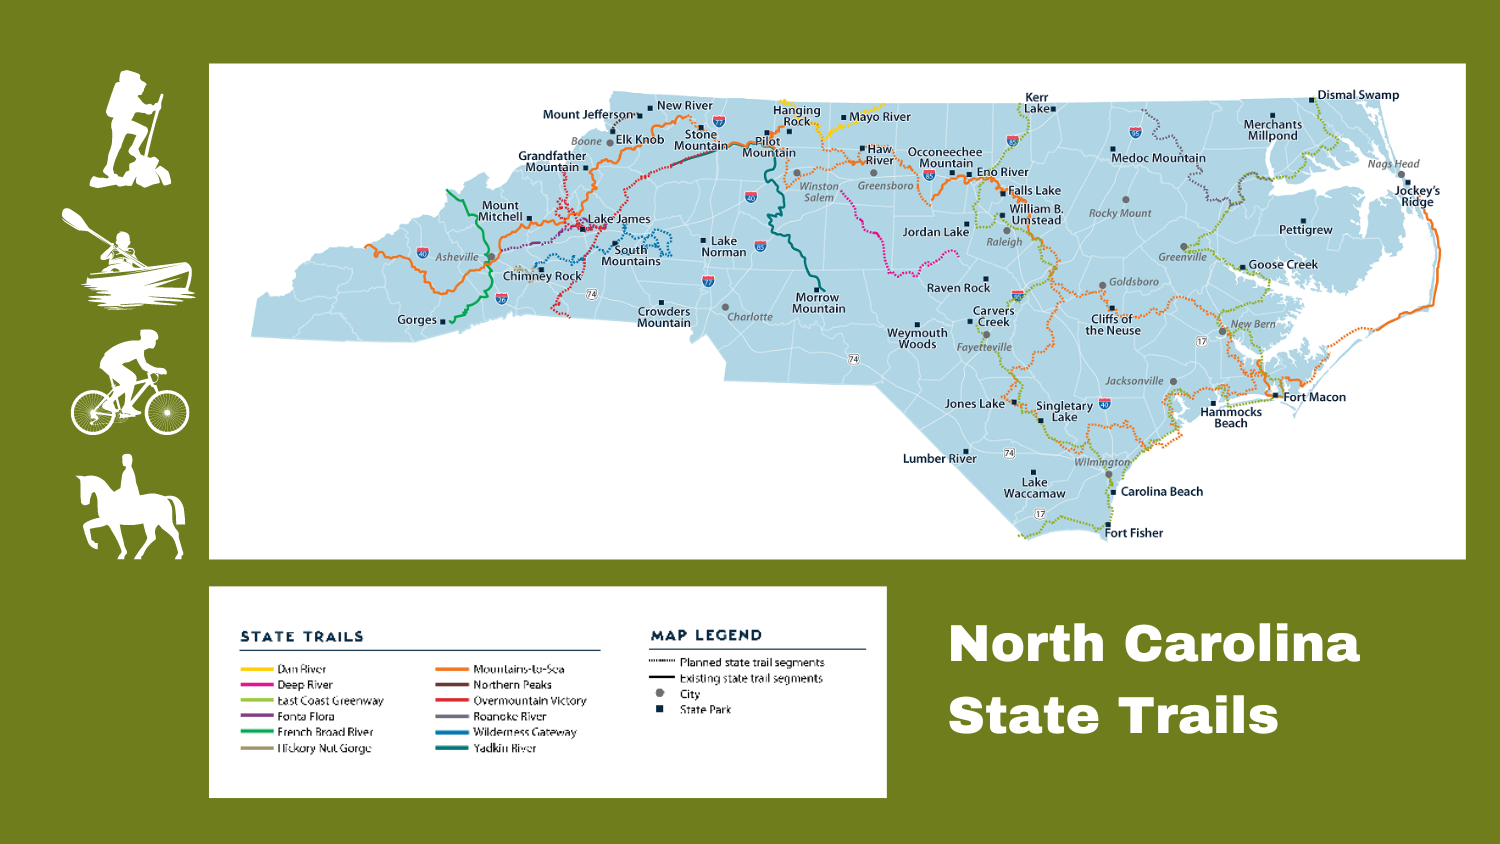 Map of North Carolina State Trails - North Carolina: The Great Trails State - Parks Recreation and Tourism Management NC State University